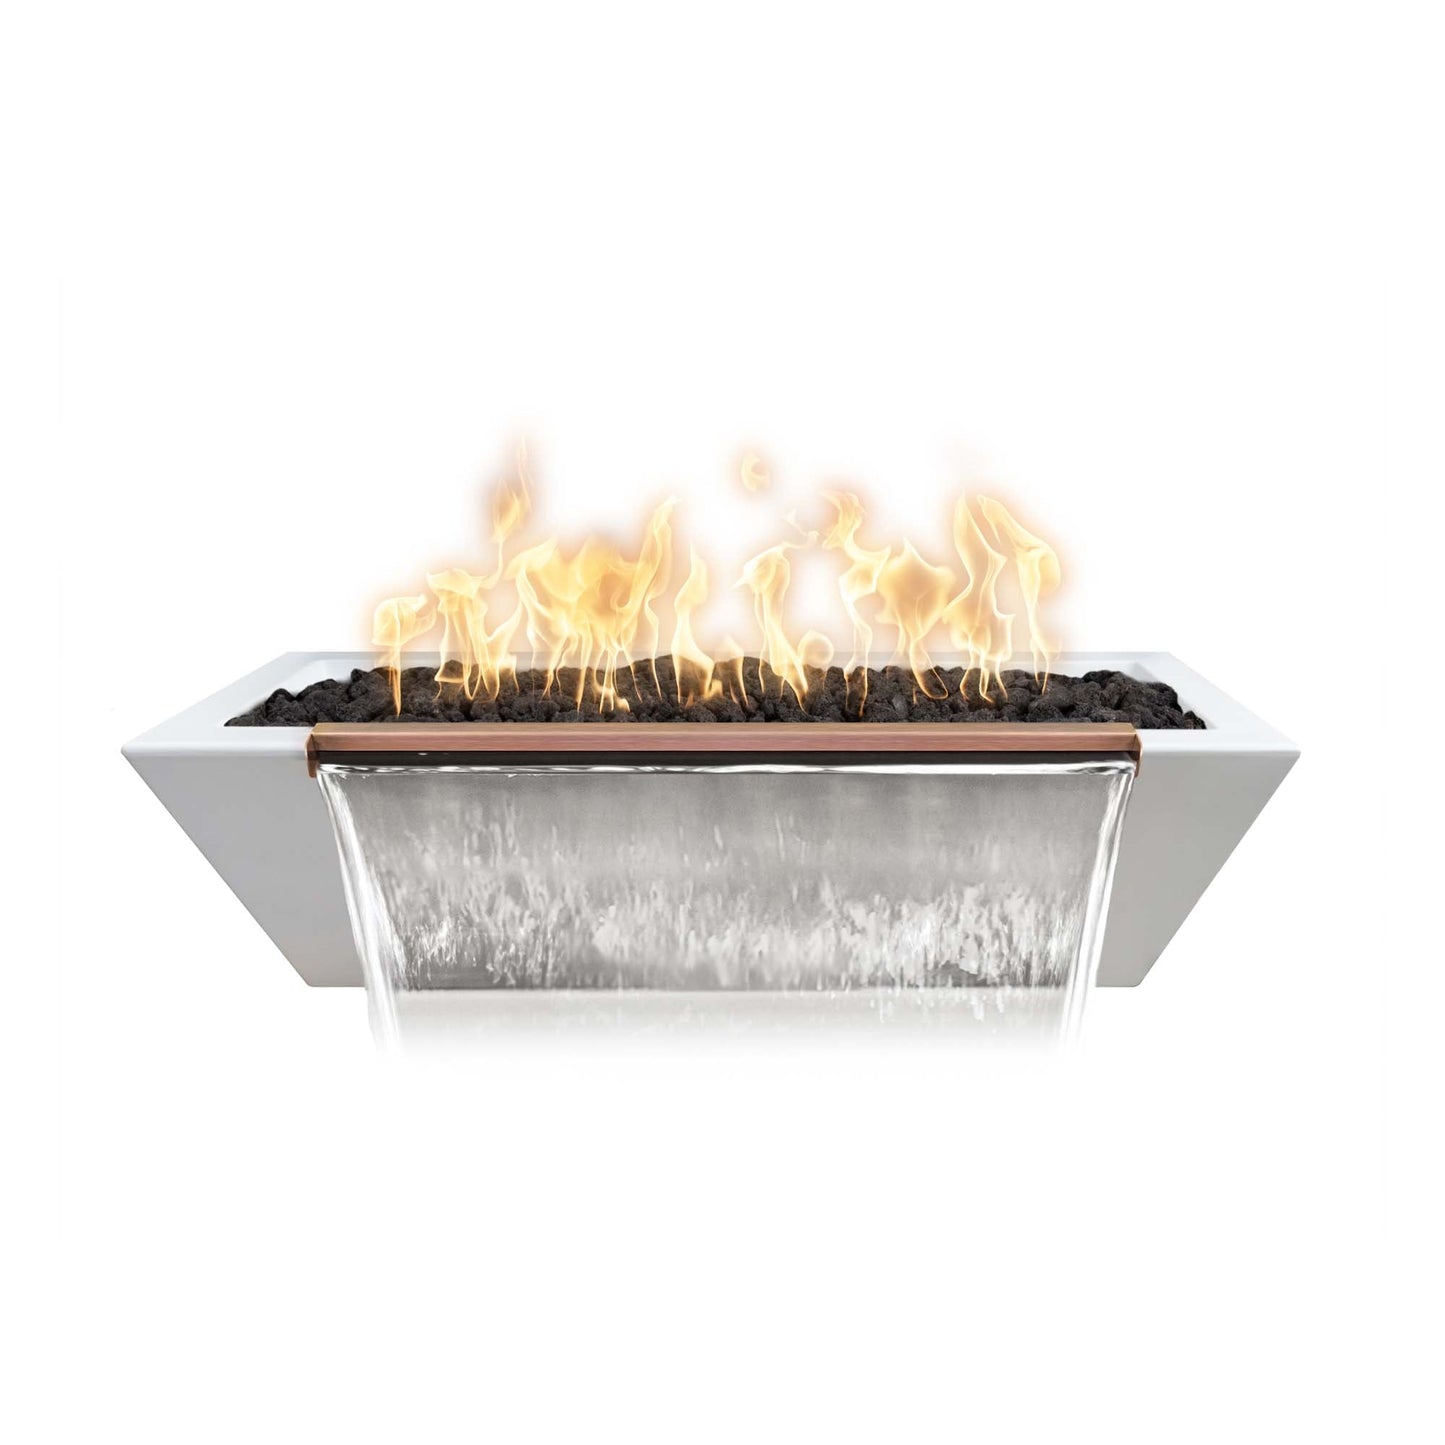 The Outdoor Plus Linear Maya 72" Black GFRC Concrete Natural Gas Fire & Water Bowl with Match Lit with Flame Sense Ignition